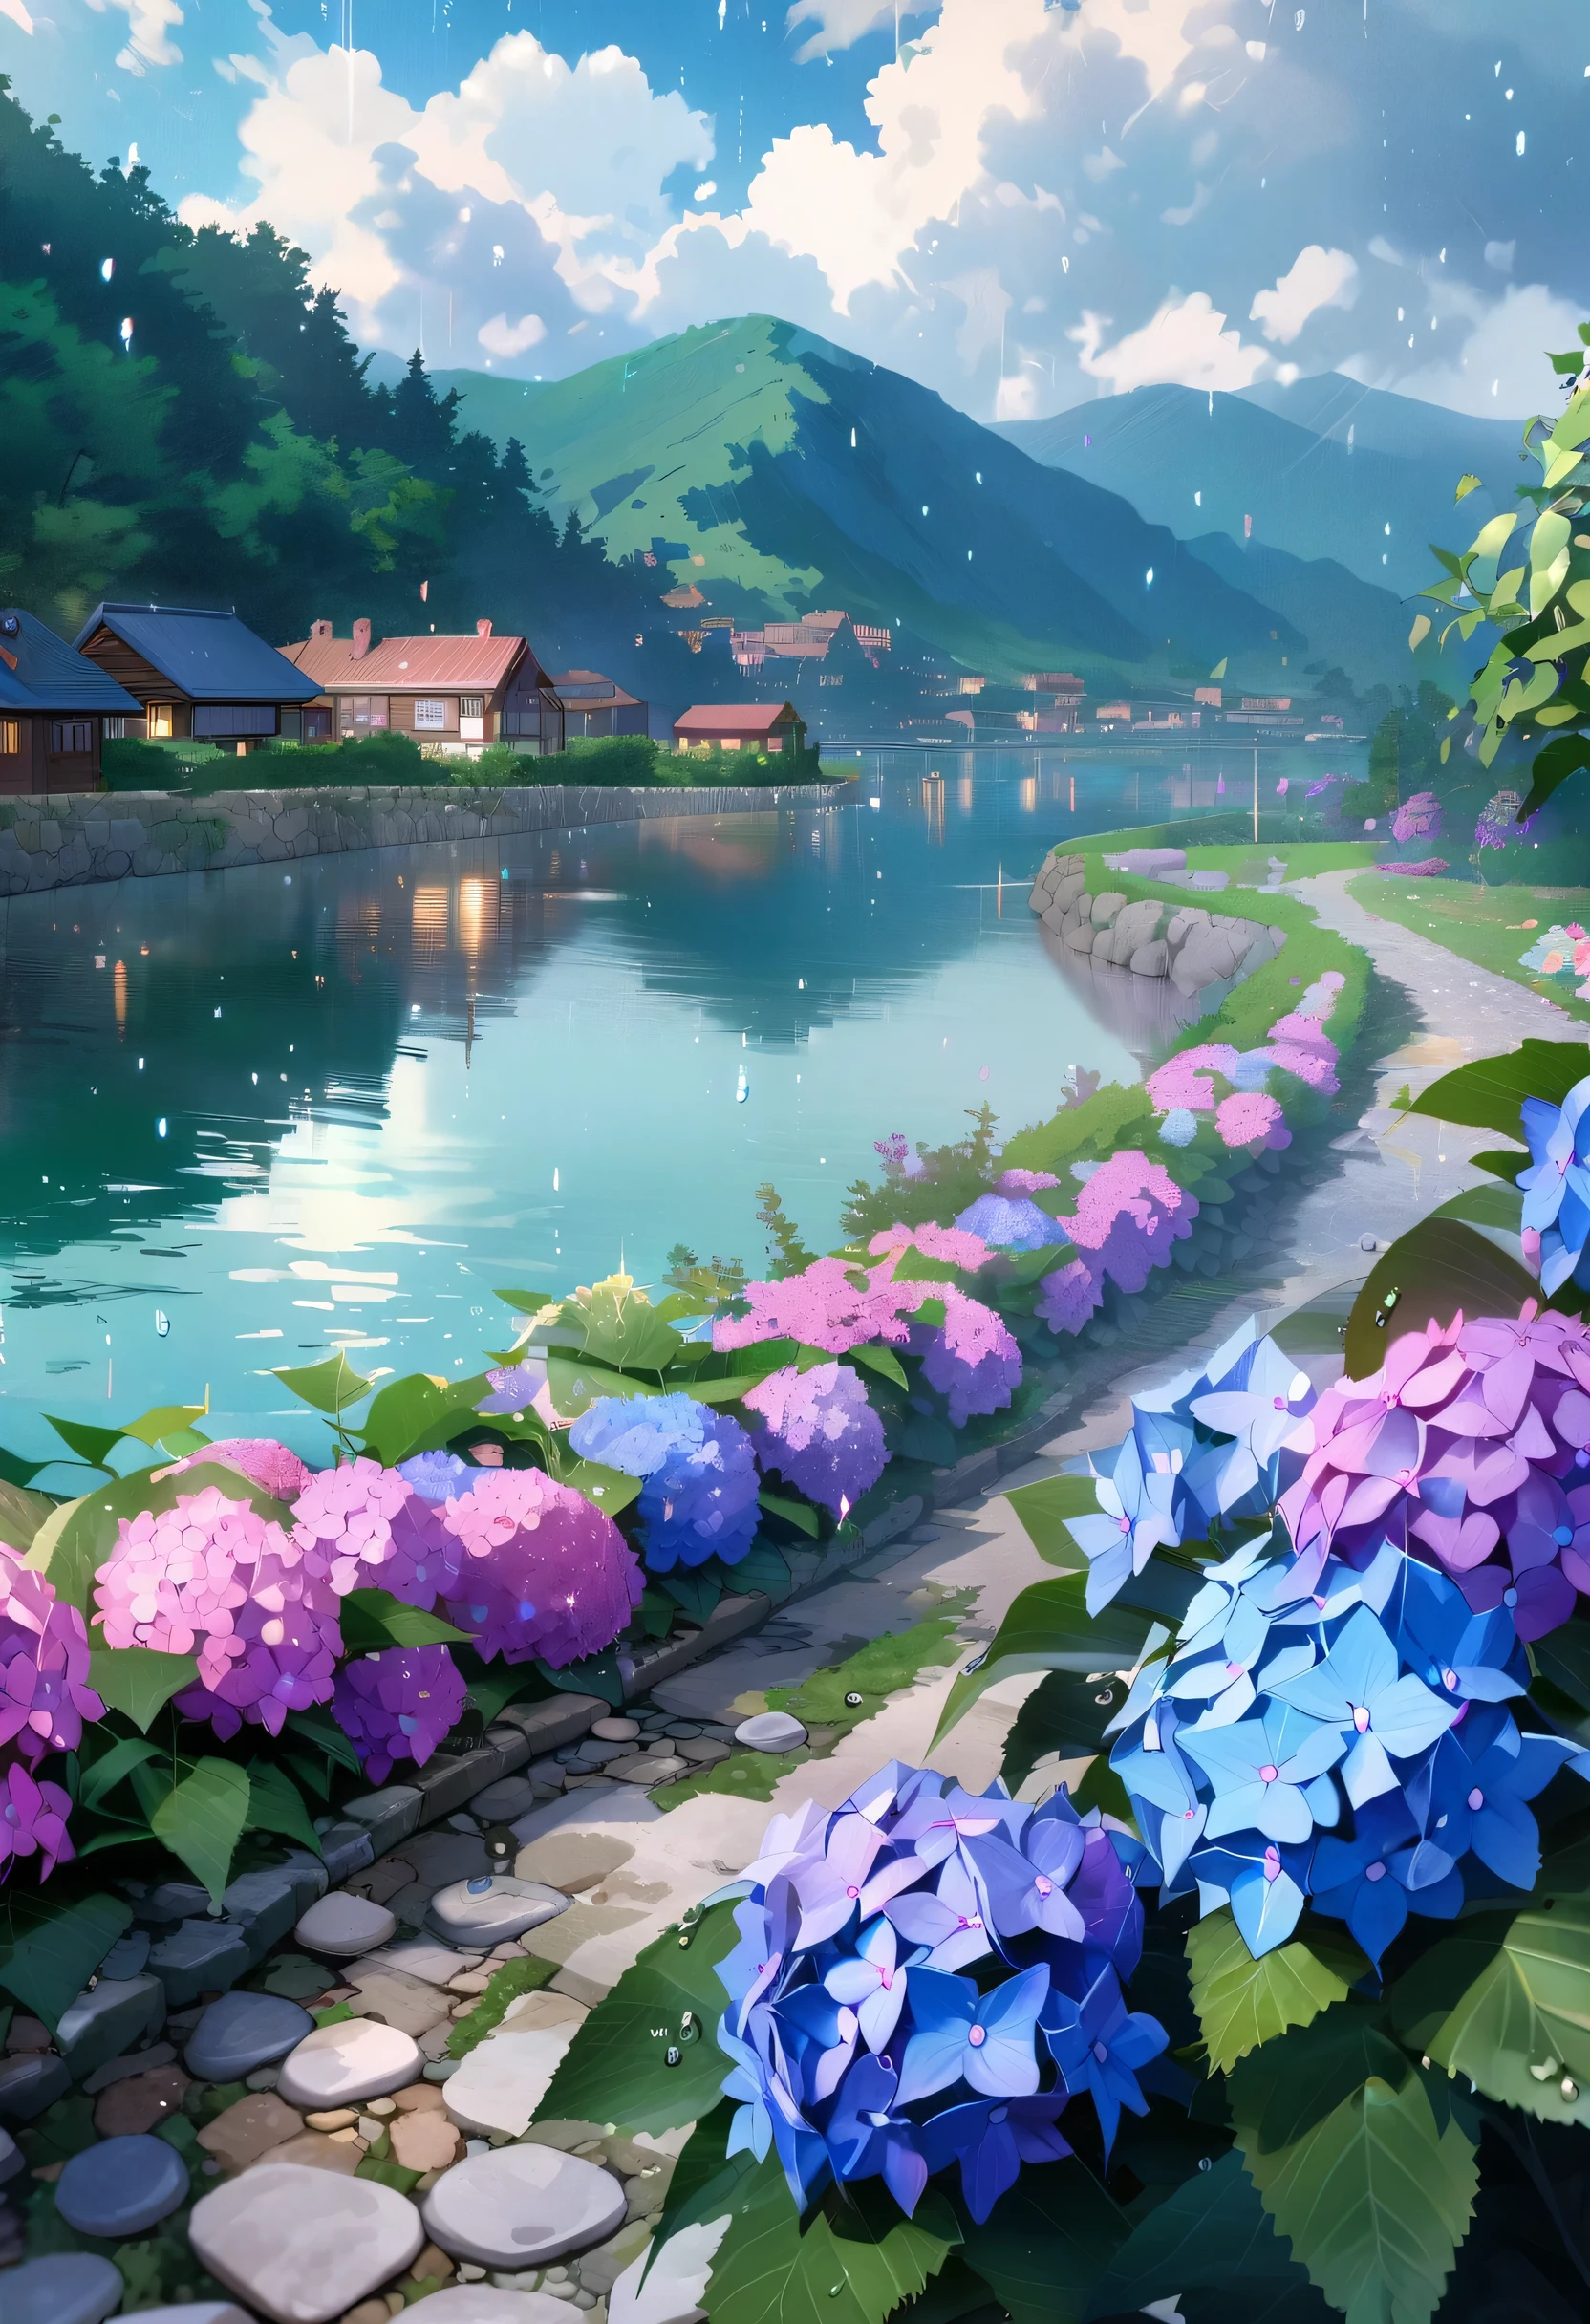 Hydrangea, garden, lake, Small hill, Pebble Road,anime, masterpiece, Rain,Cloudy,highest quality, Anatomically correct, Attention to detail, 8k, wallpaper,Water droplets sparkle